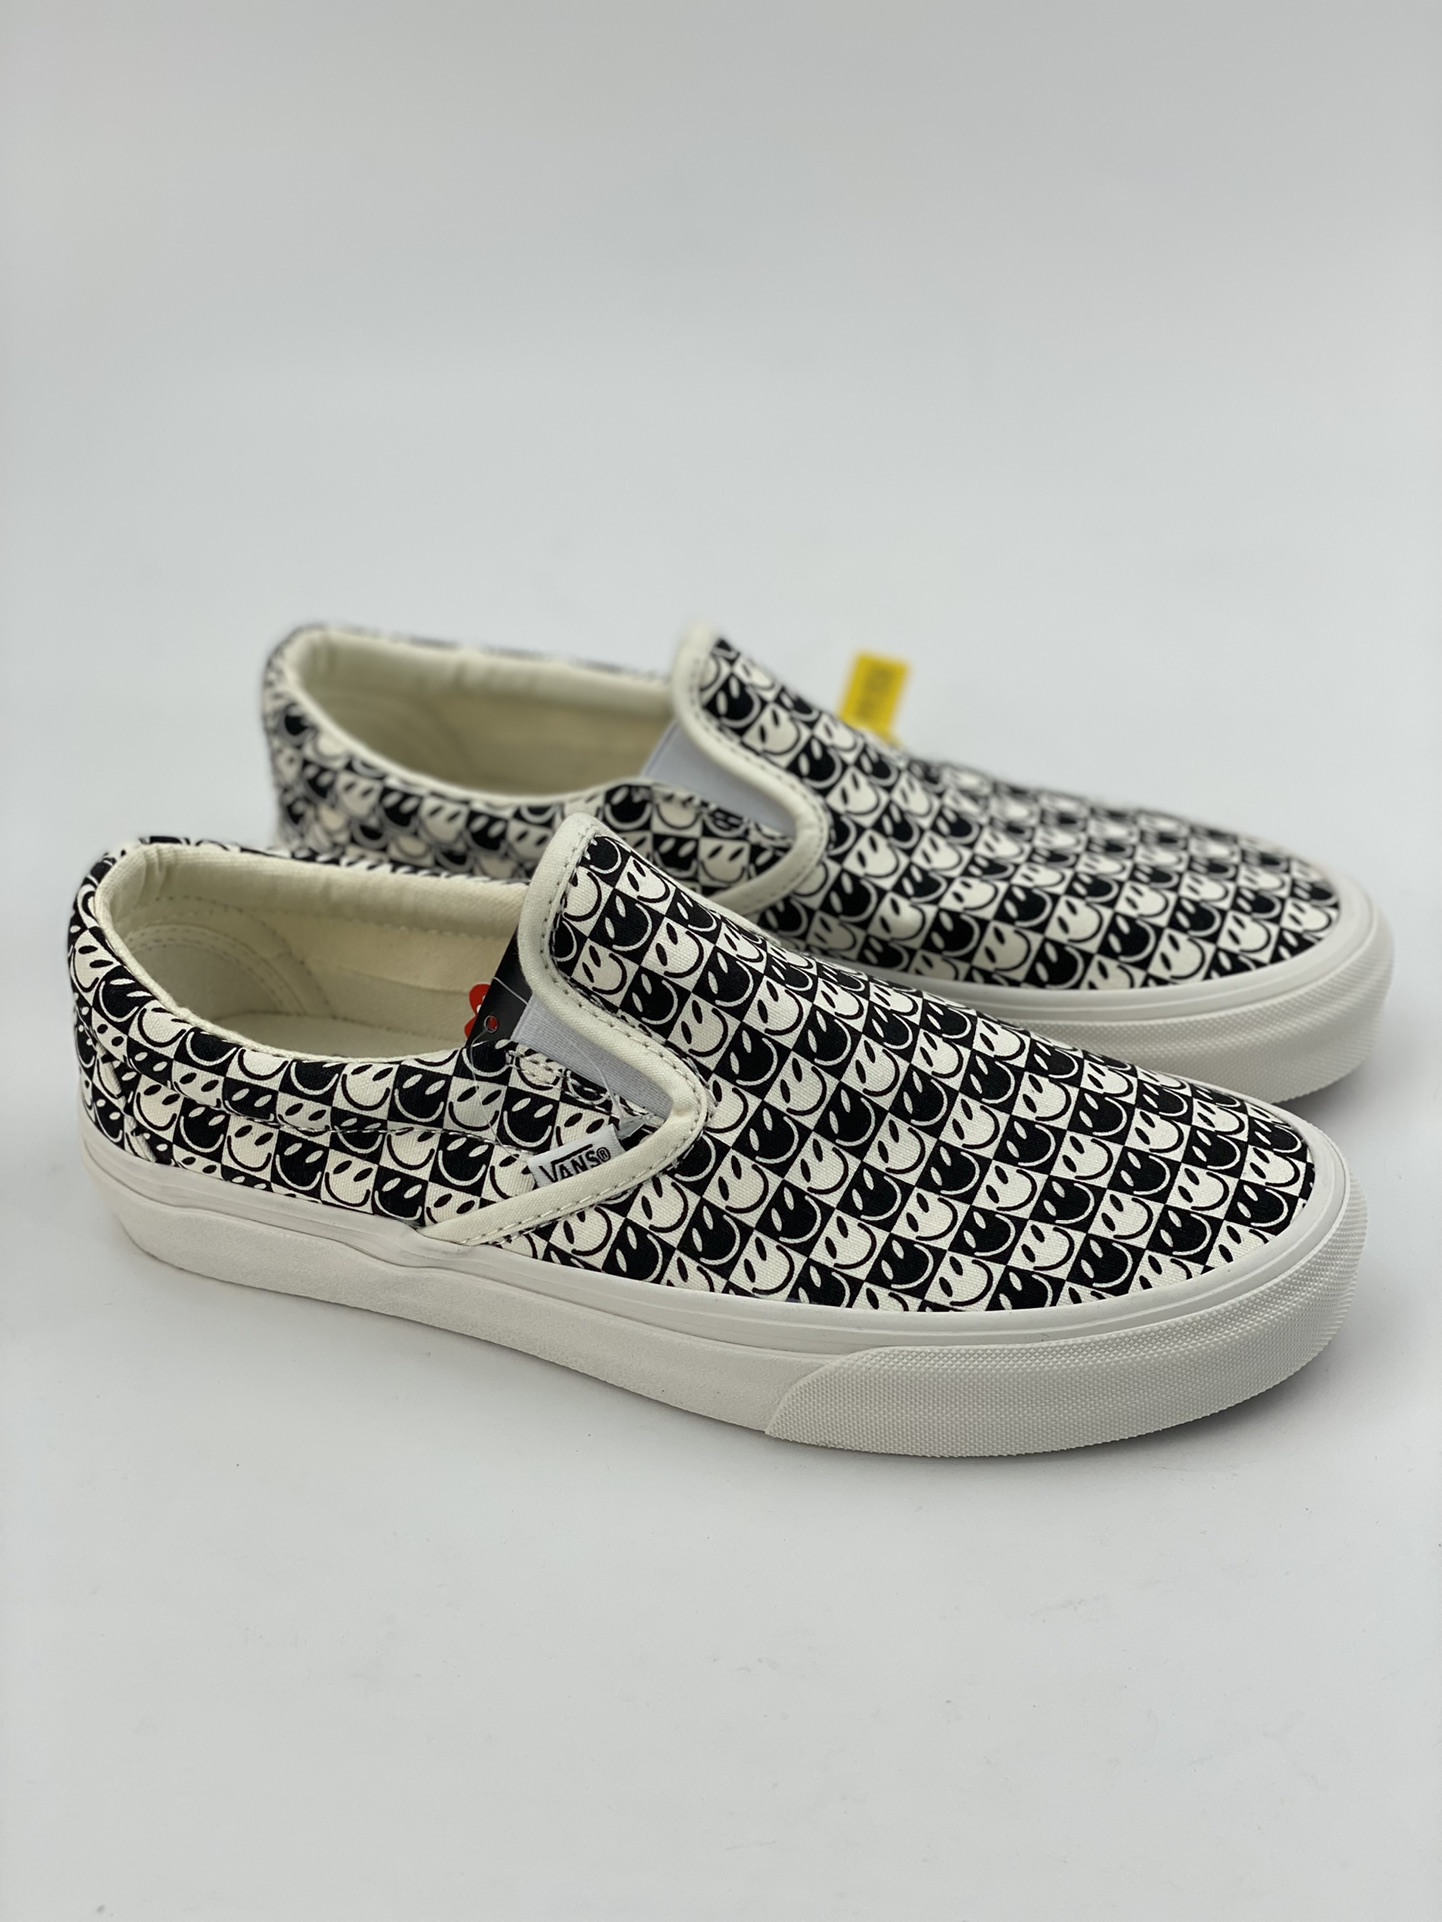 Vans Vans official Classics Slip-On VR3 smiley face one-step checkerboard print canvas shoes VN0007NCKIG